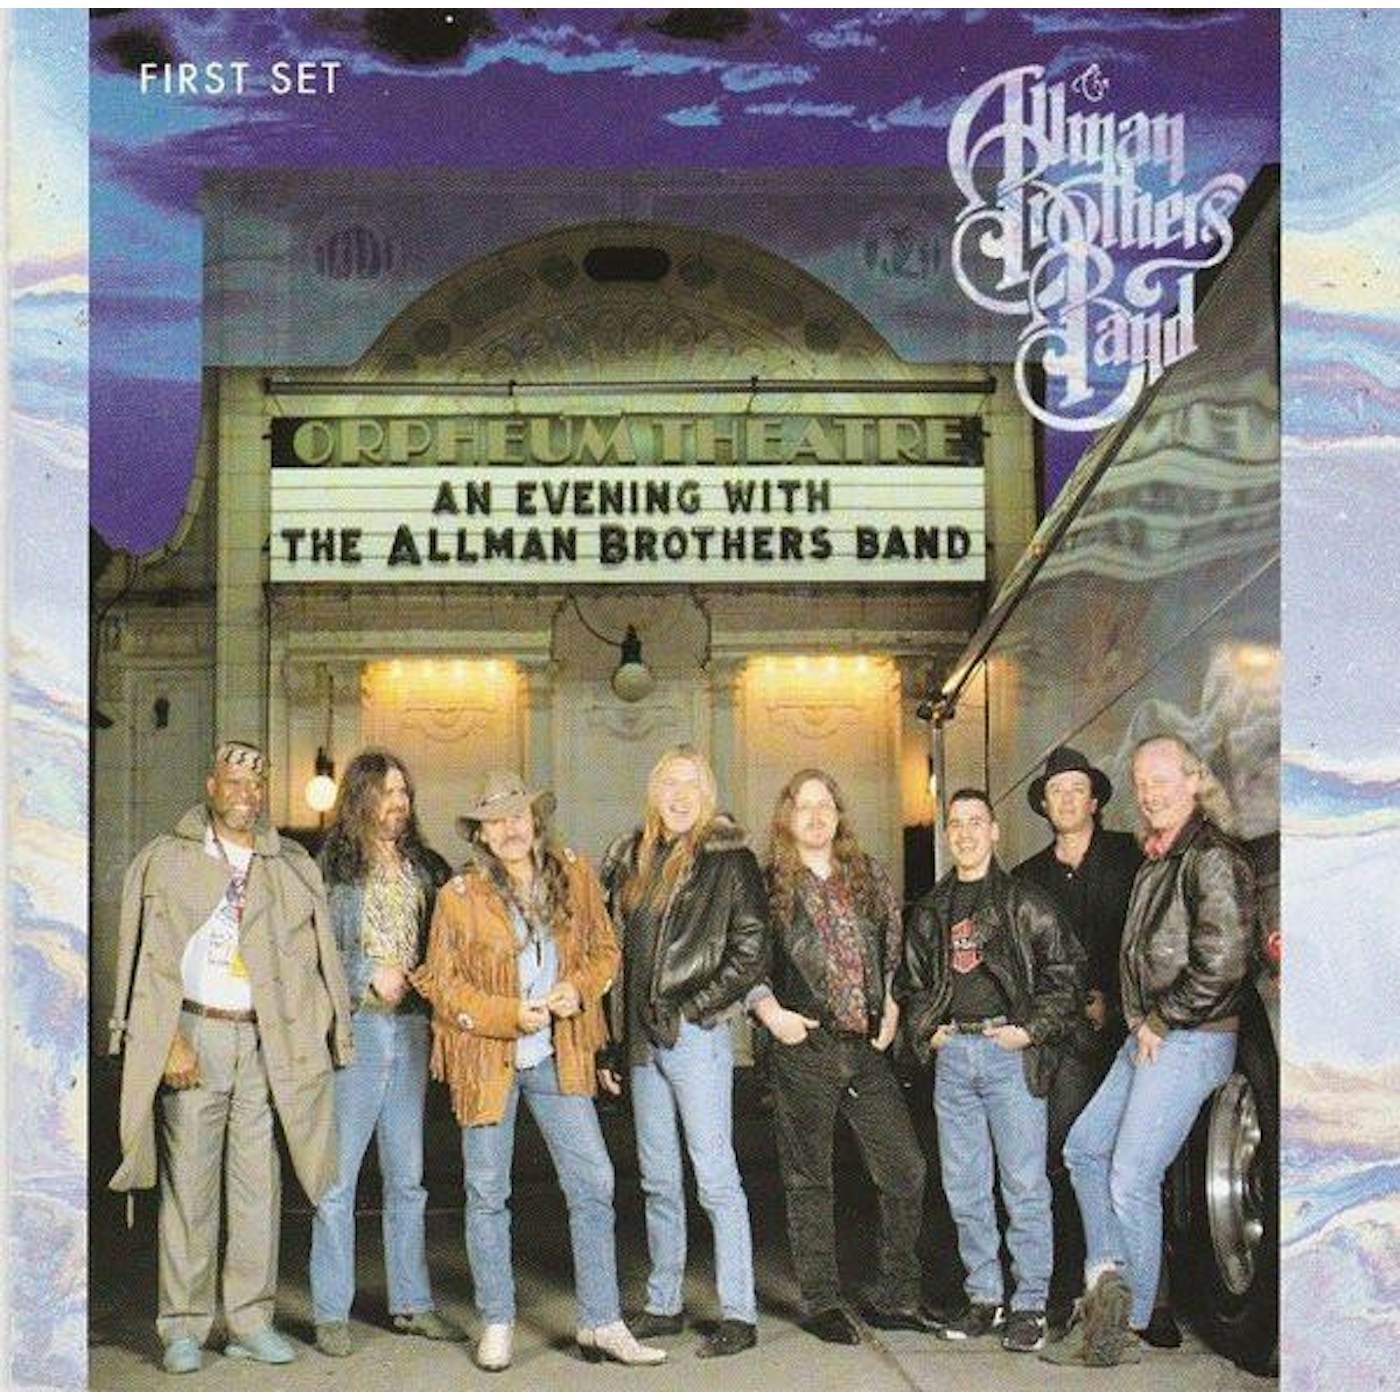 AN EVENING WITH THE ALLMAN BROTHERS BAND: FIRST SET CD